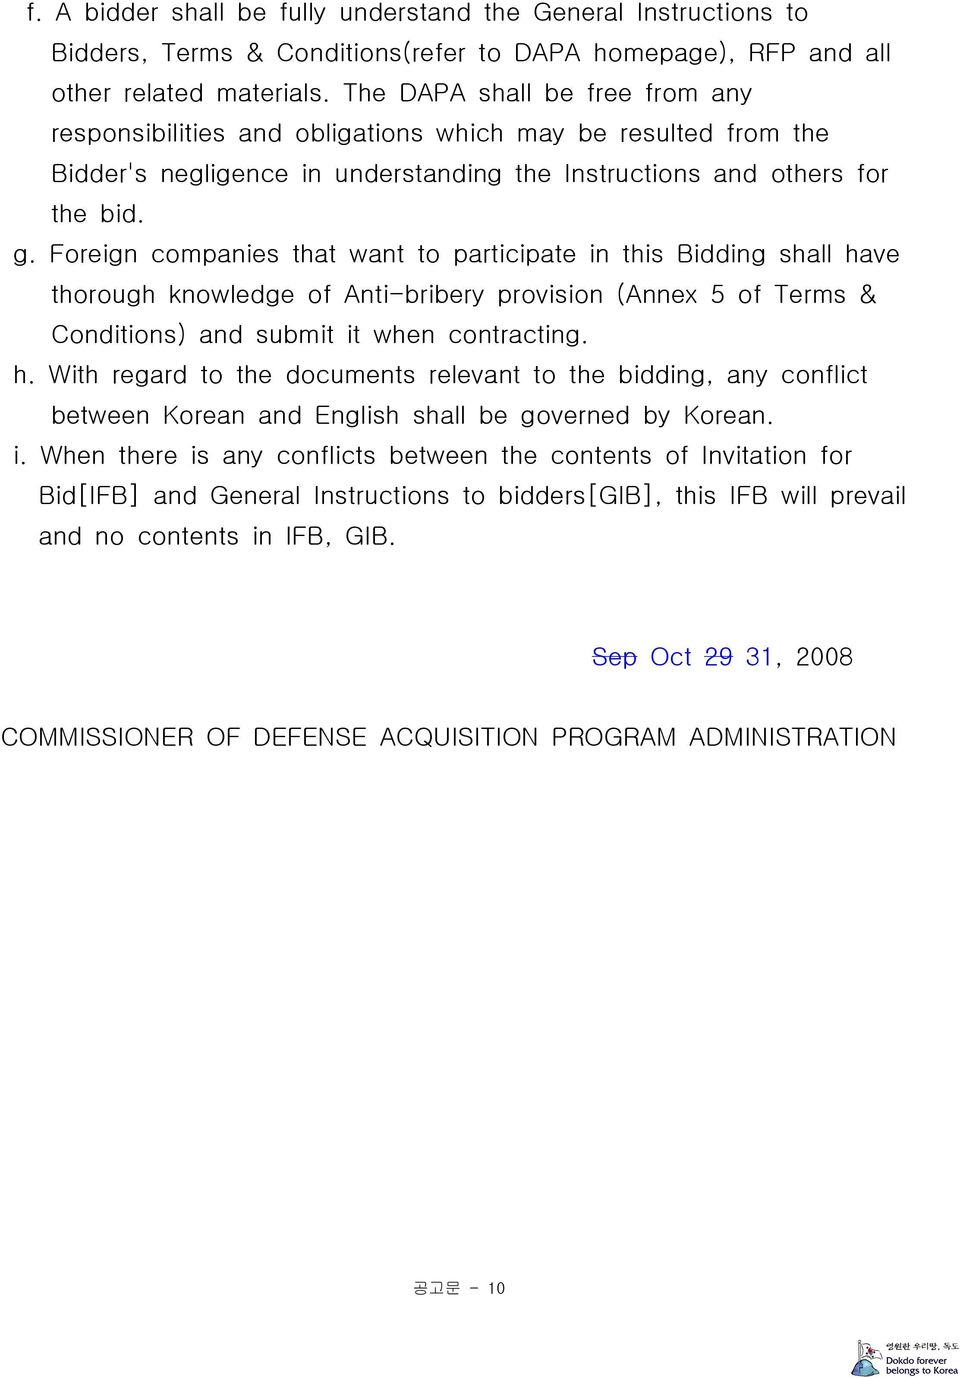 Foreign companies that want to participate in this Bidding shall have thorough knowledge of Anti-bribery provision (Annex 5 of Terms & Conditions) and submit it when contracting. h. With regard to the documents relevant to the bidding, any conflict between Korean and English shall be governed by Korean.